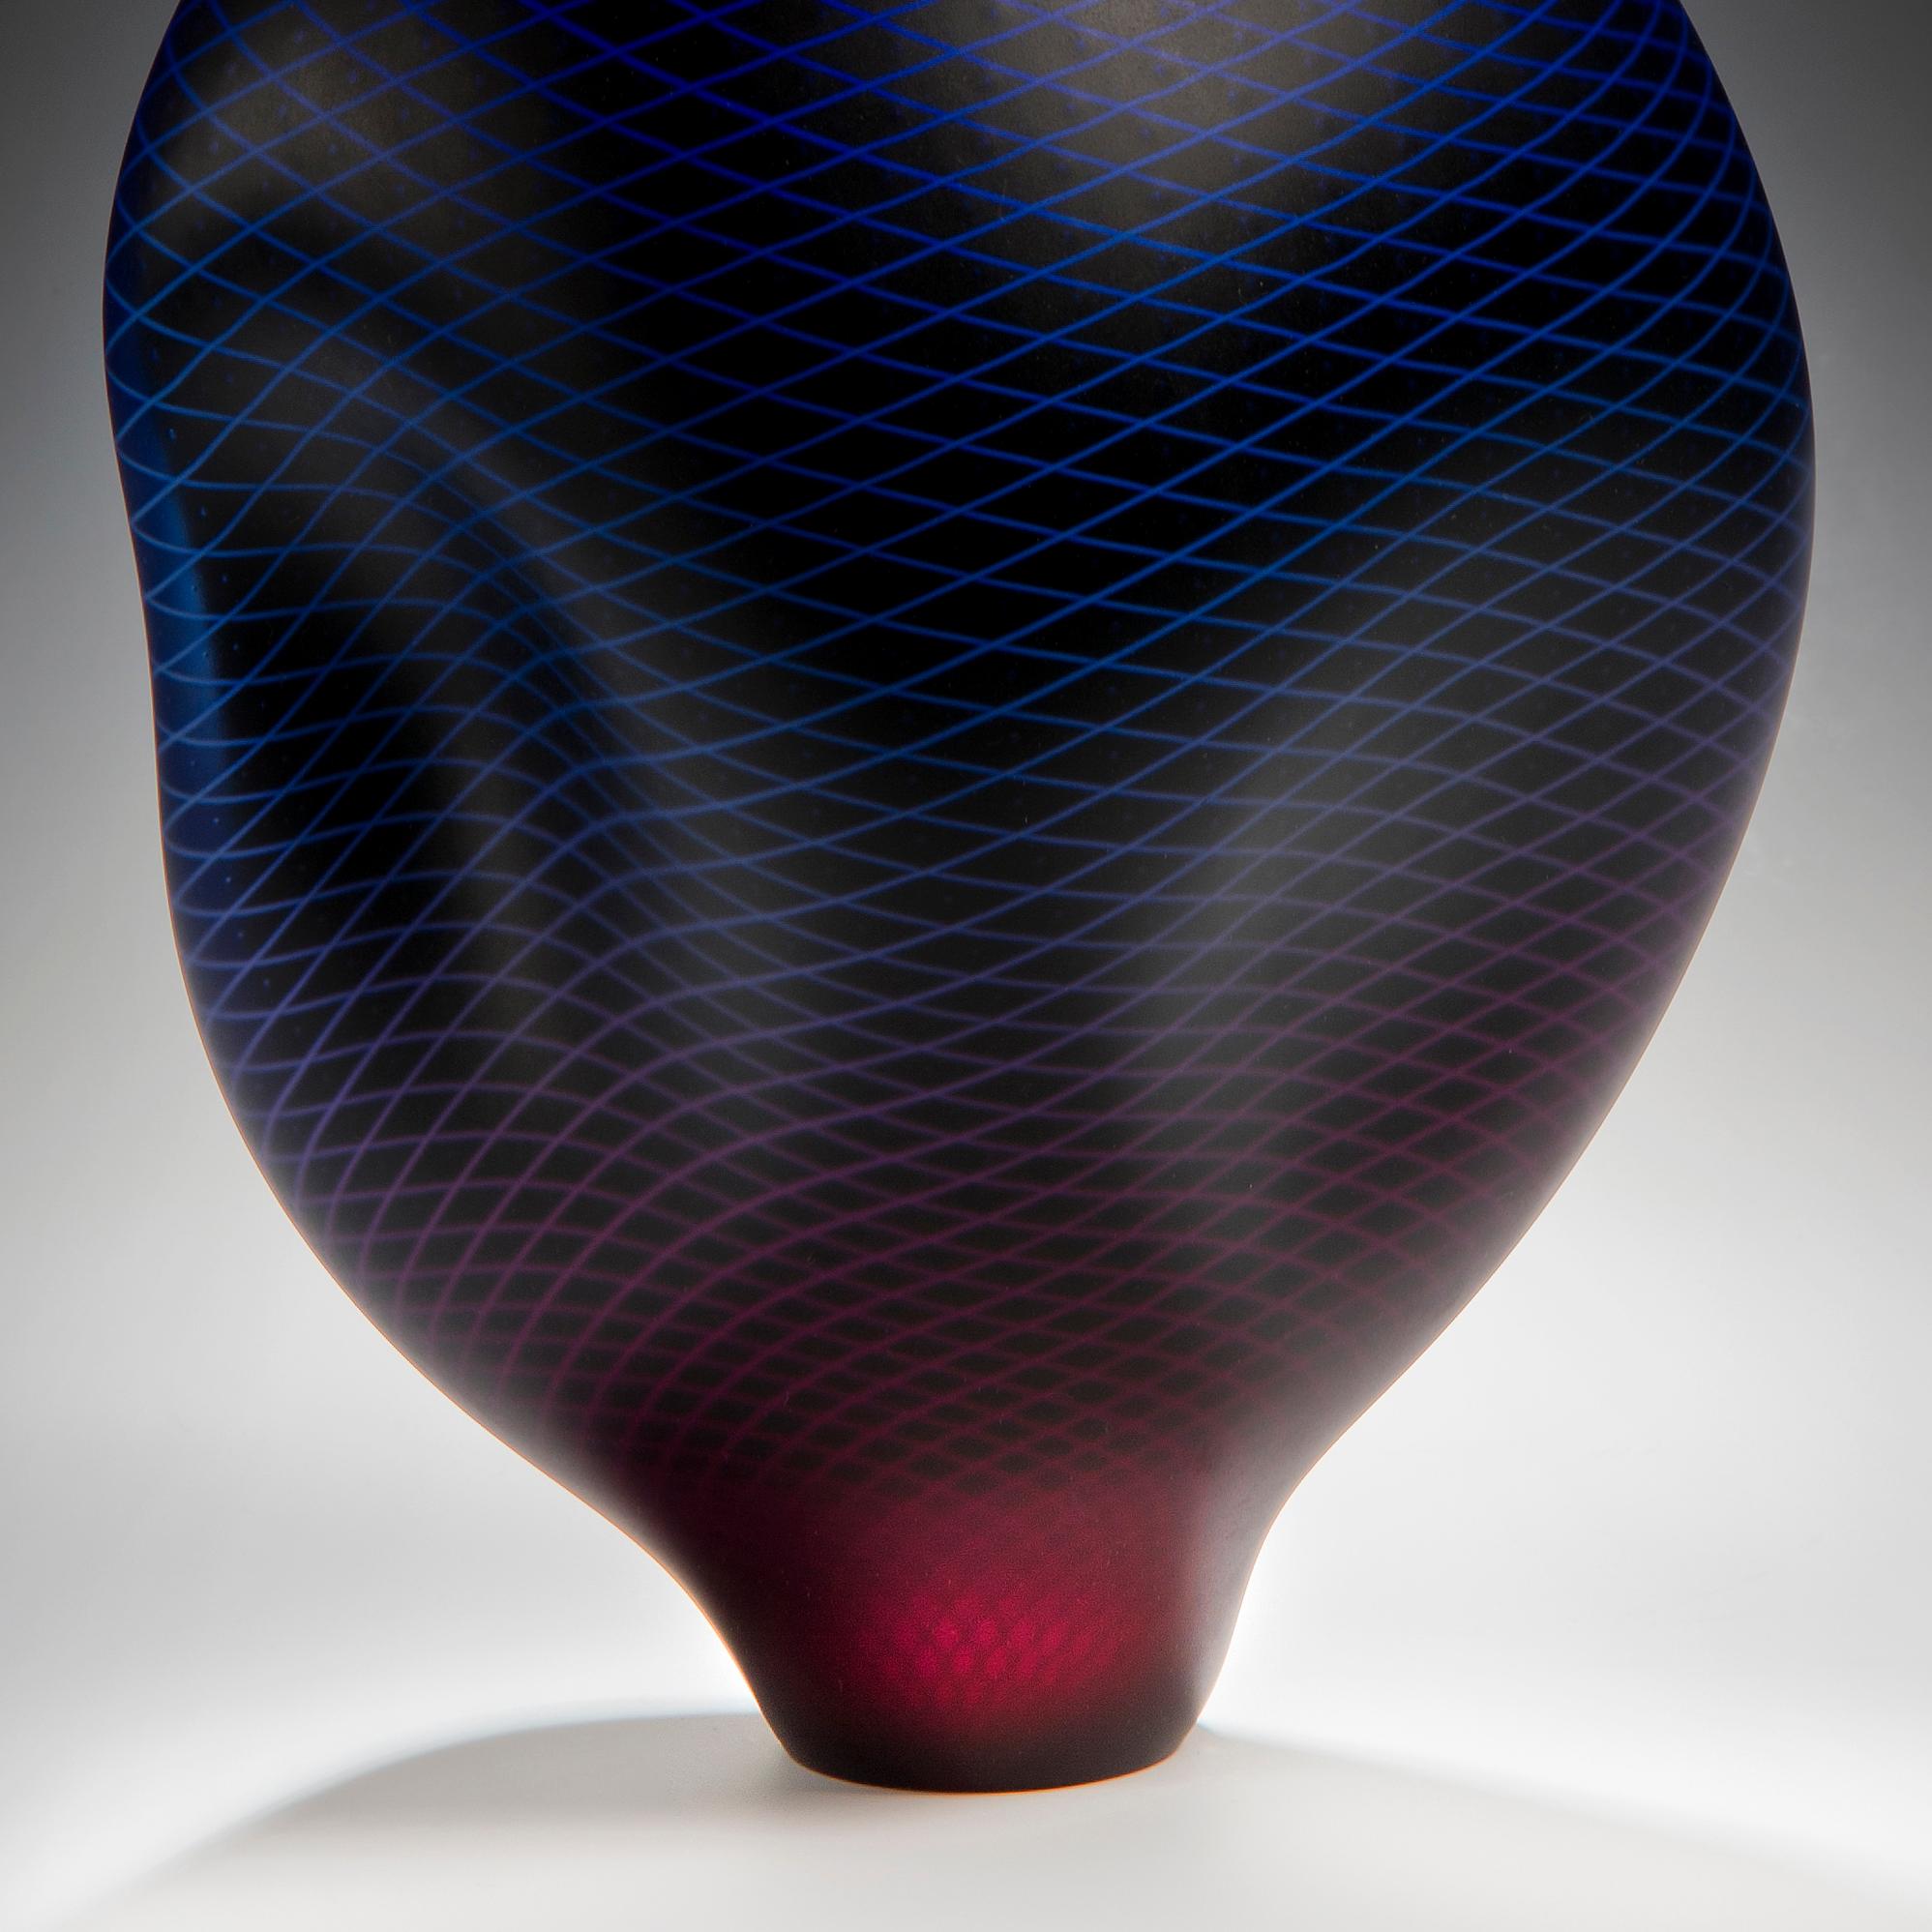 Hand-Crafted Warp & Fade 017, a Unique Blue, Purple & Red Glass Sculpture by Liam Reeves For Sale